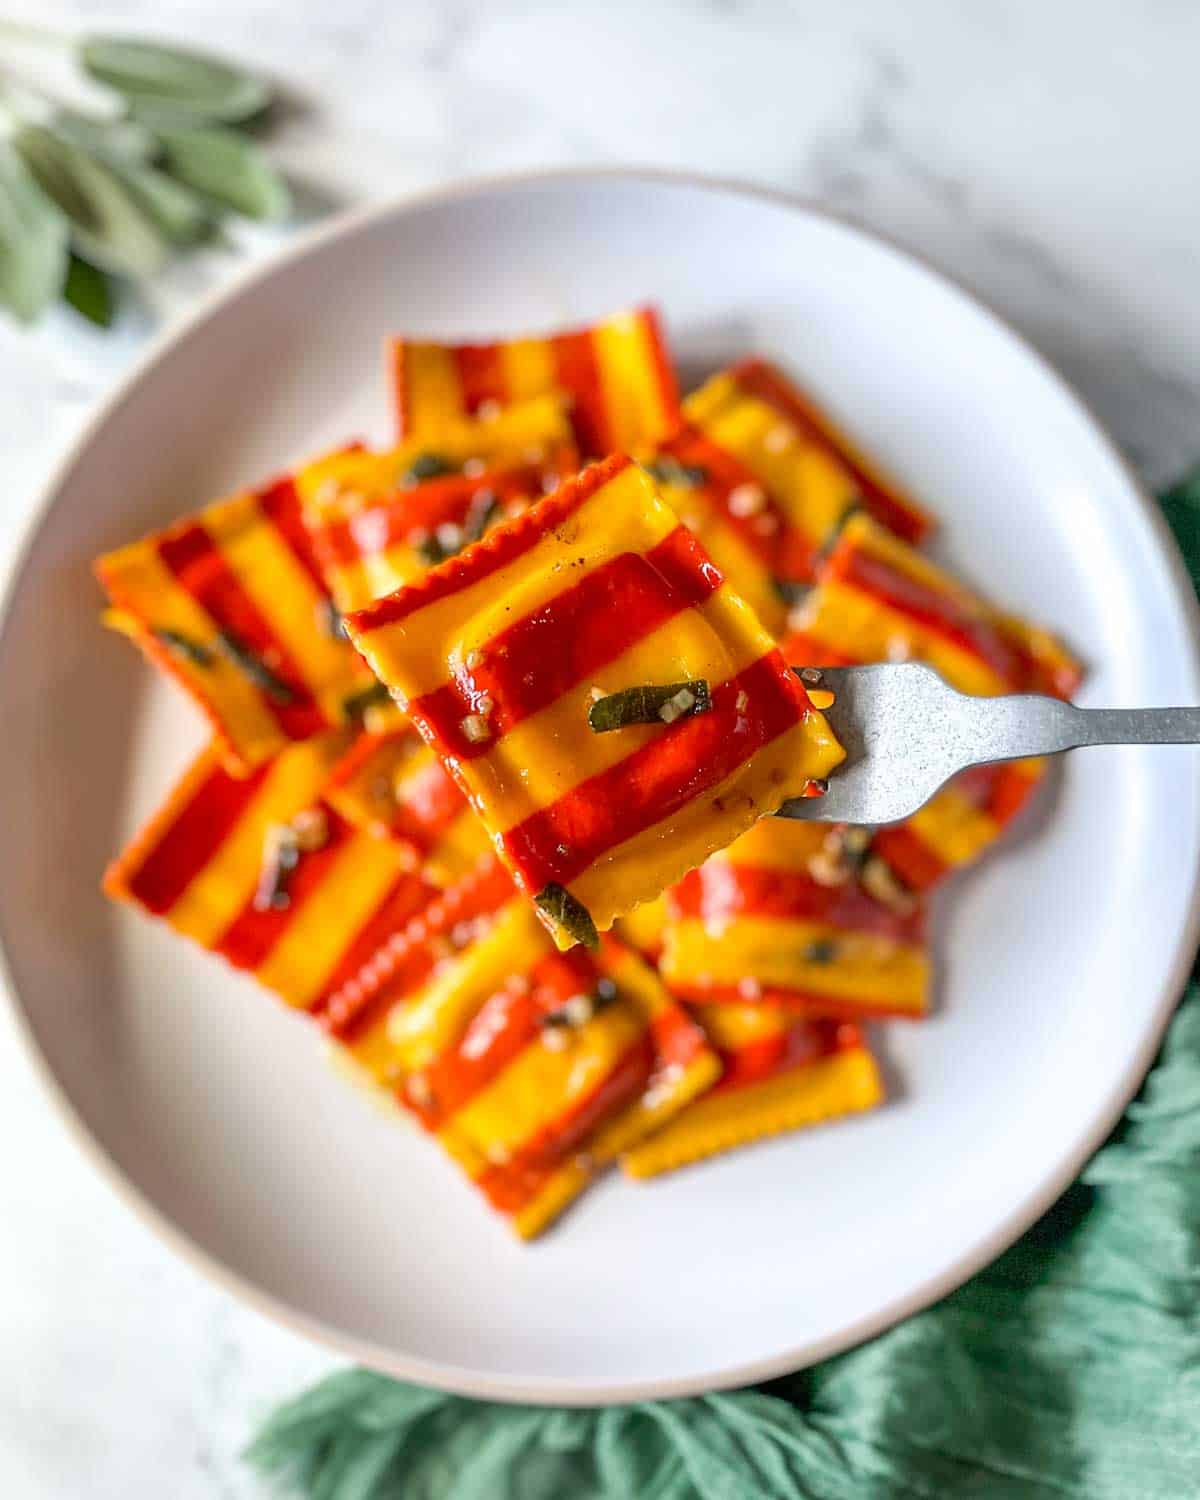 A red and yellow striped lobster ravioli is held on a silver fork over a plate of ravioli.